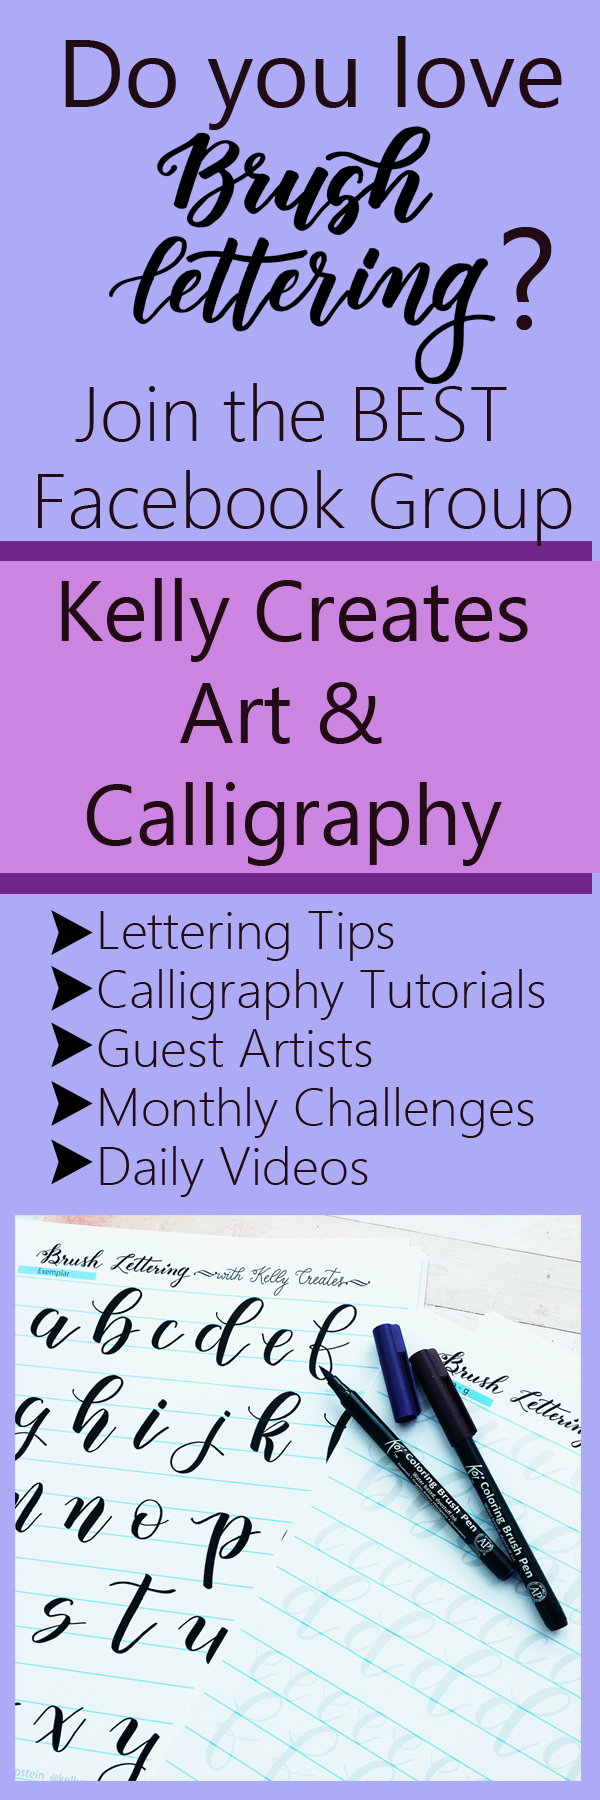 I found the best Facebook group for calligraphy and lettering! So friendly and inspiring and TONS of helpful tutorials and videos Kelly Creates Art & Calligraphy